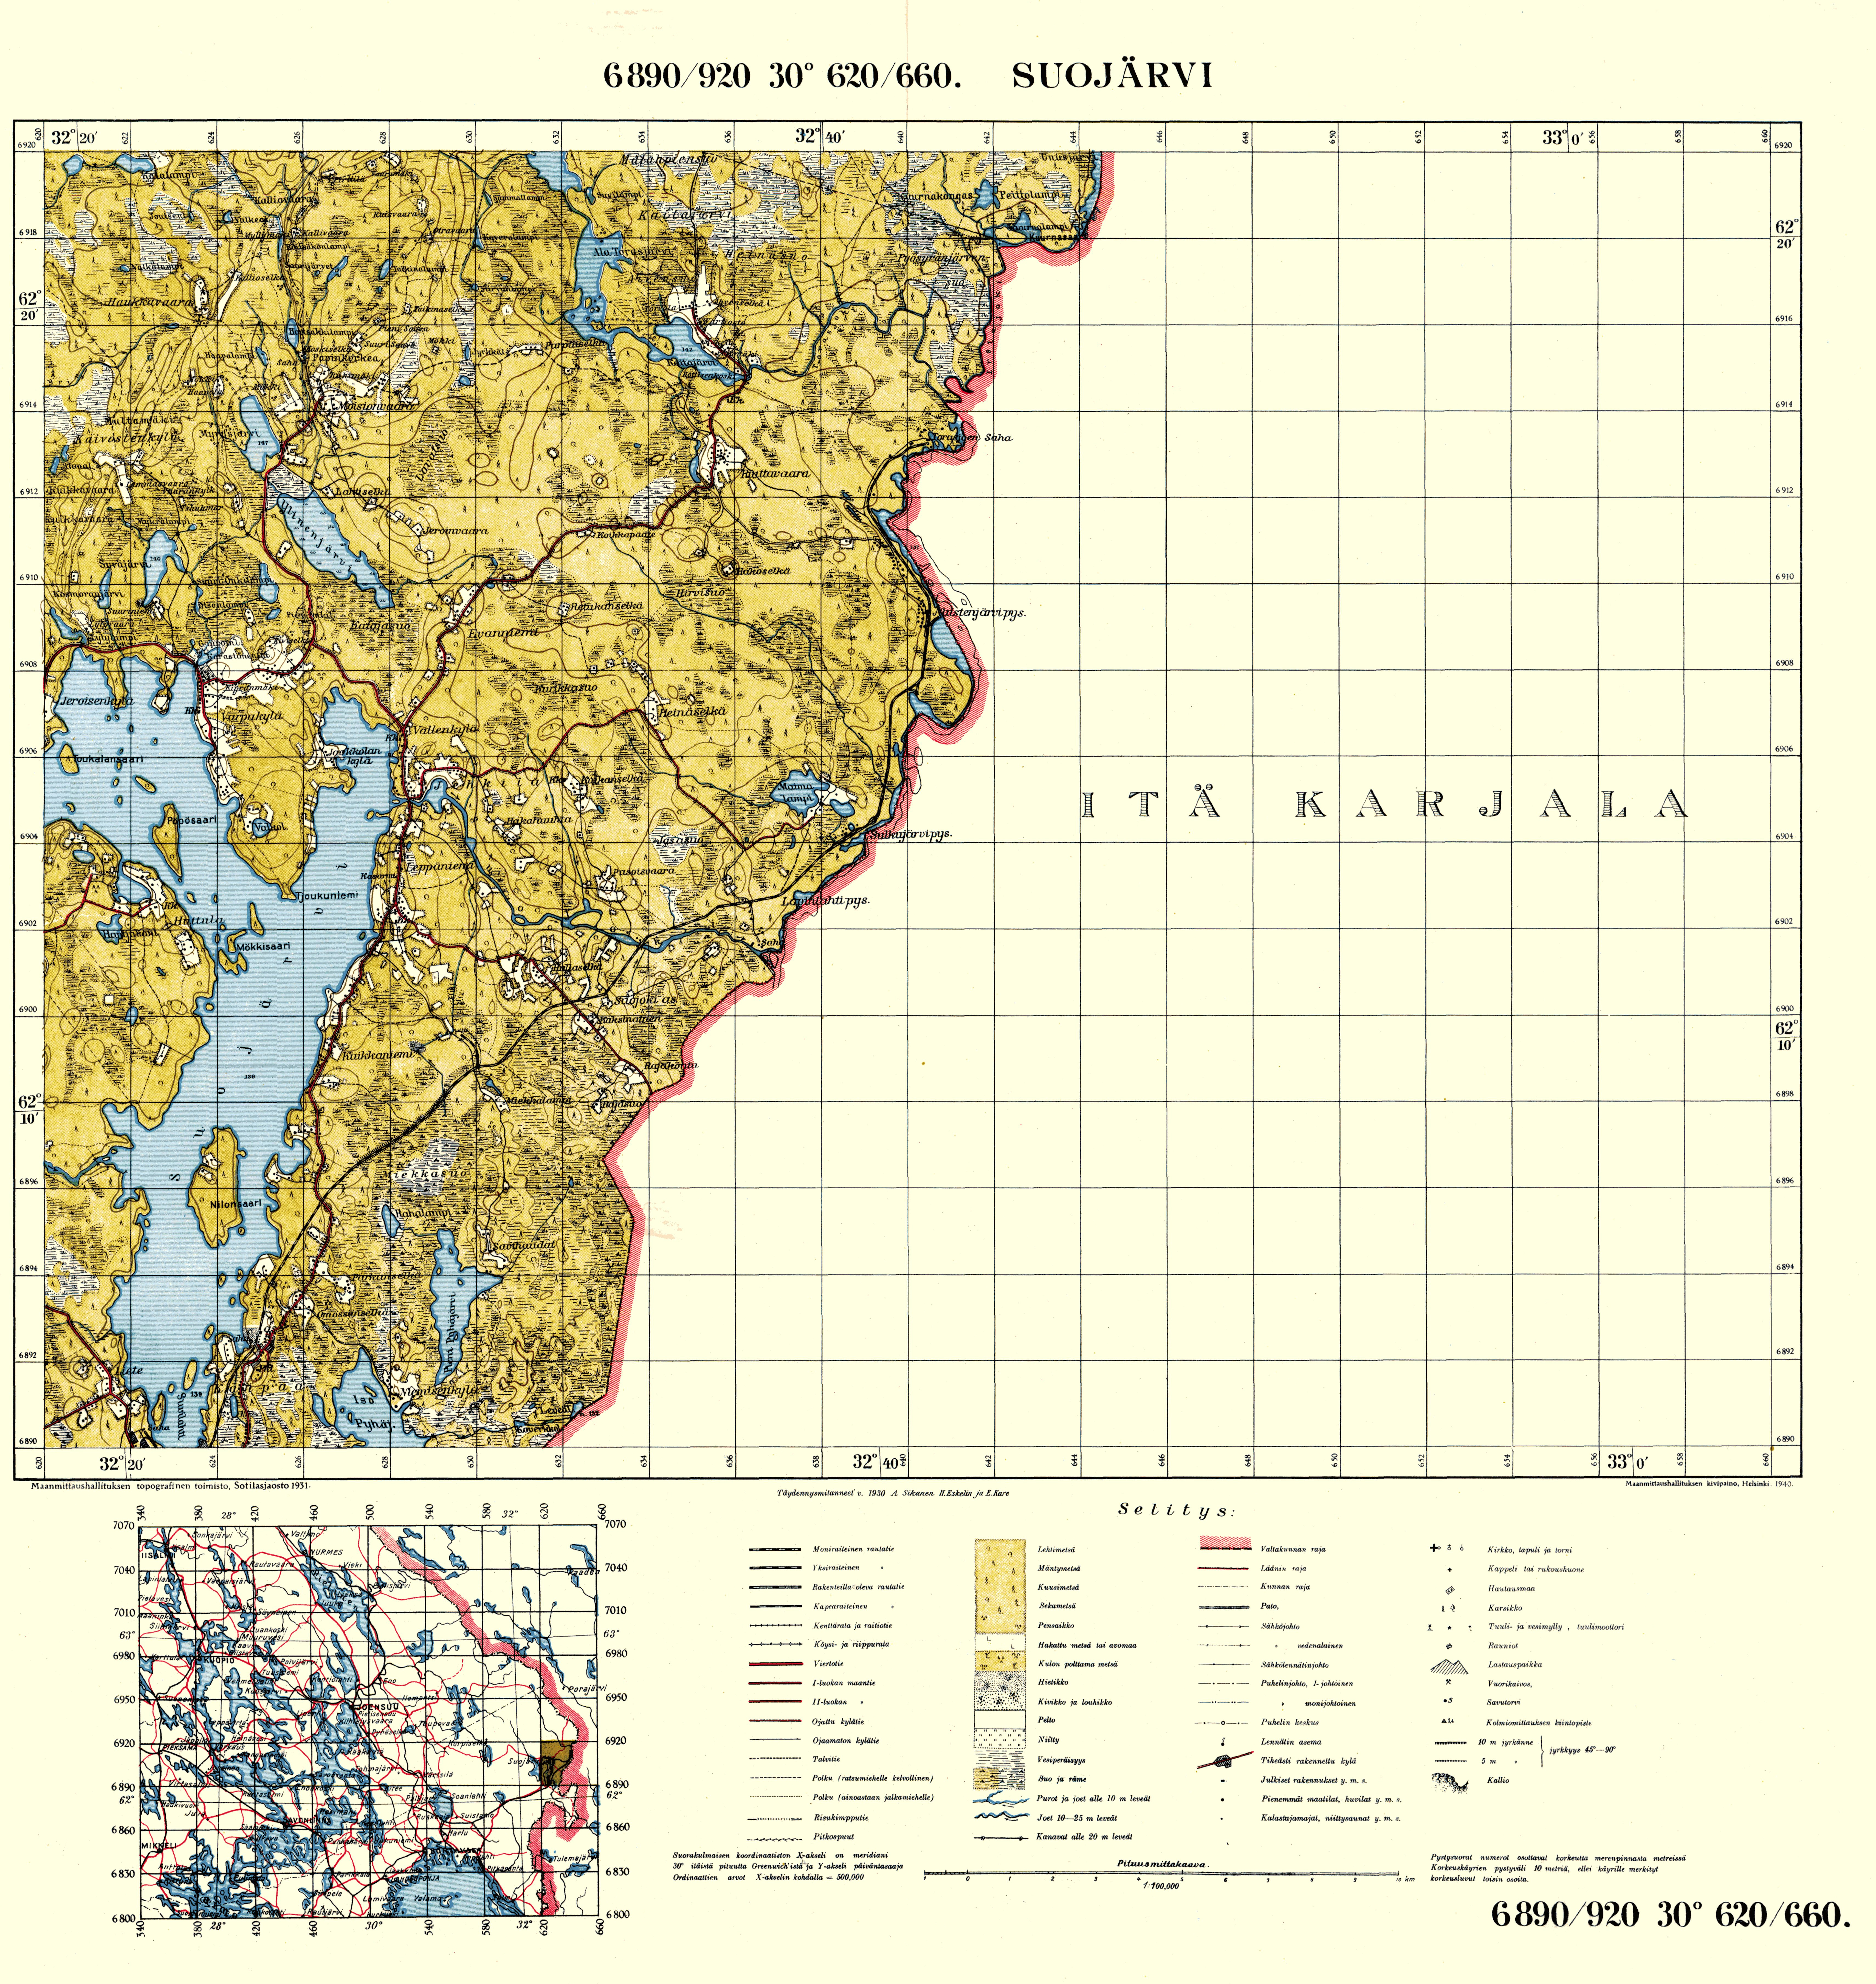 Suojärvi. Topografikartta 5214. Topographic map from 1940. Use the zooming tool to explore in higher level of detail. Obtain as a quality print or high resolution image